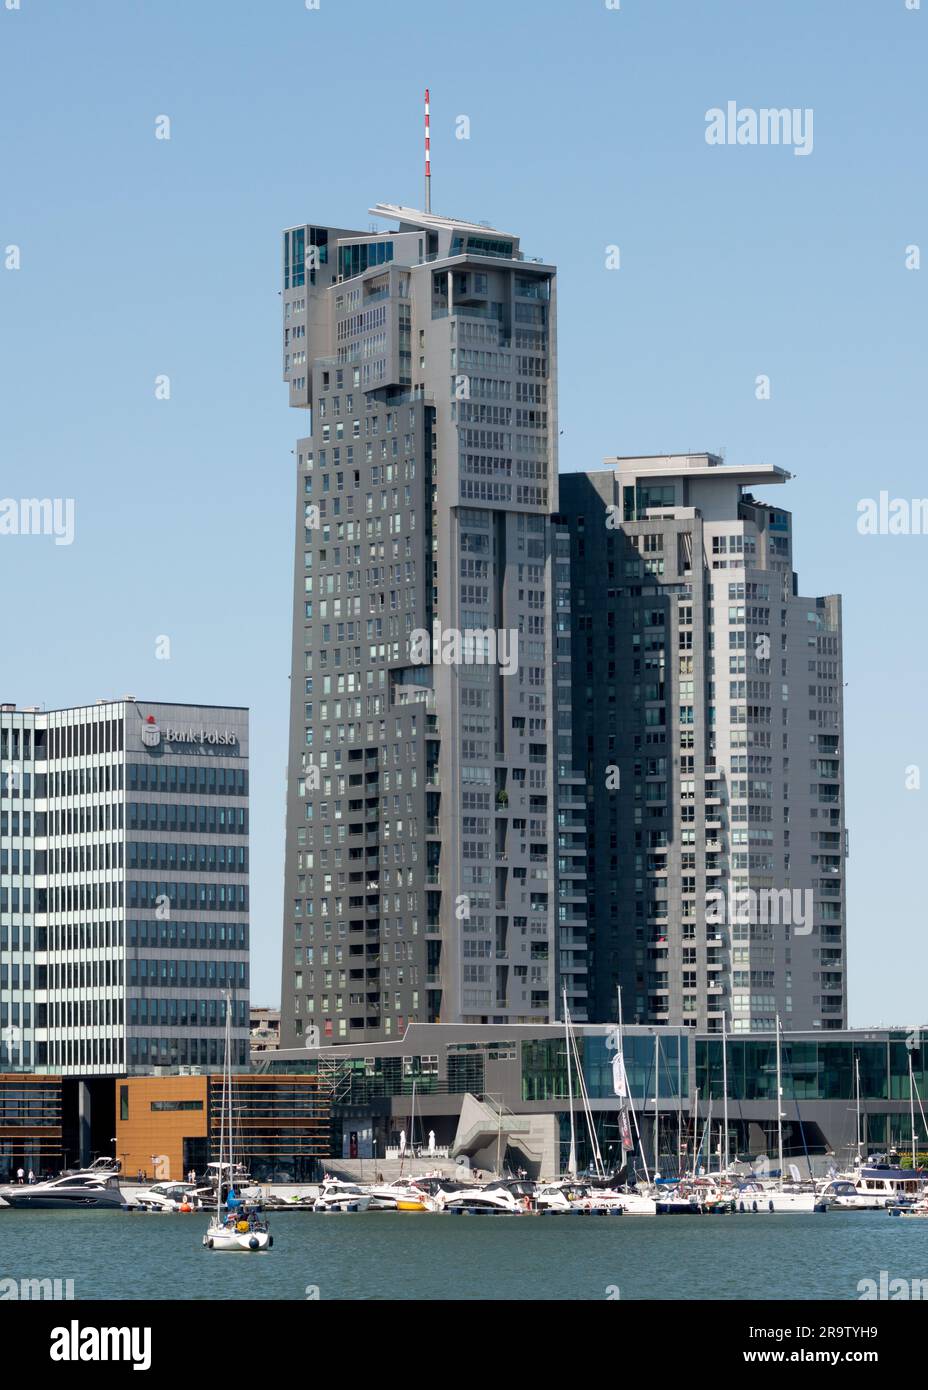 Sea Towers and Bank of Poland buildings at the Gdynia Marina and harbour in Gdynia, Poland, Europe, EU Stock Photo